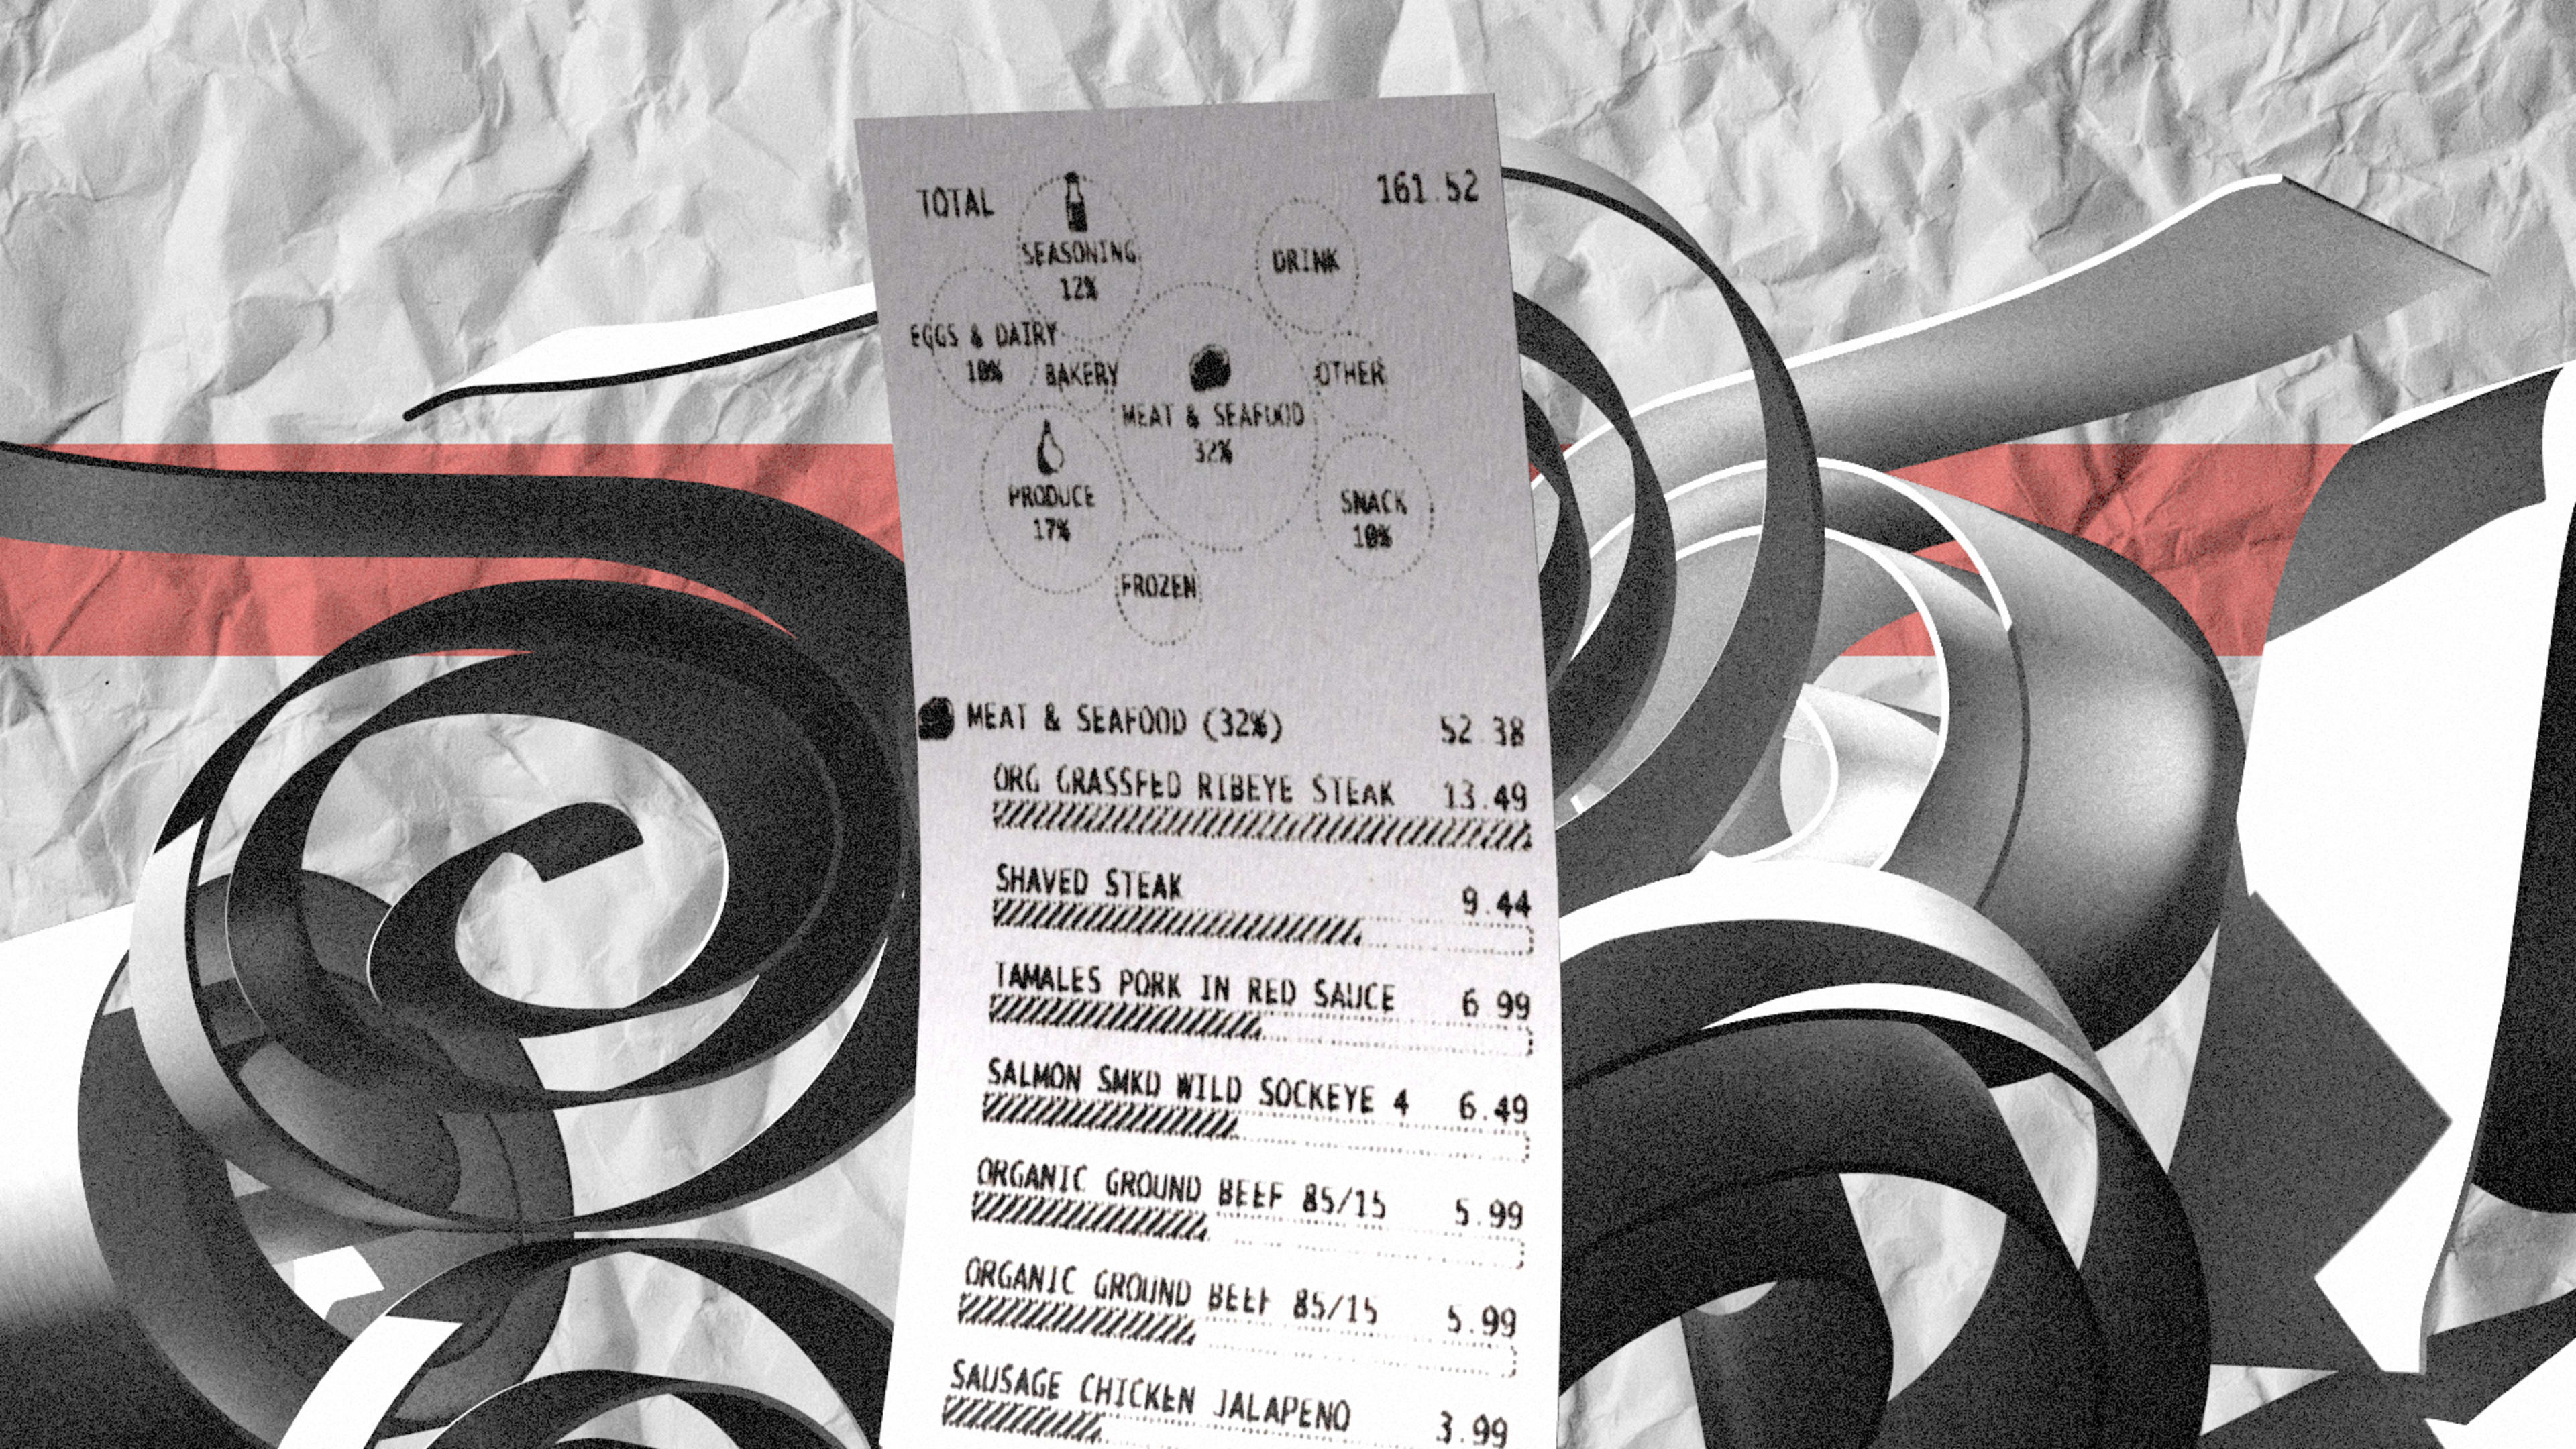 The humble receipt gets a brilliant redesign